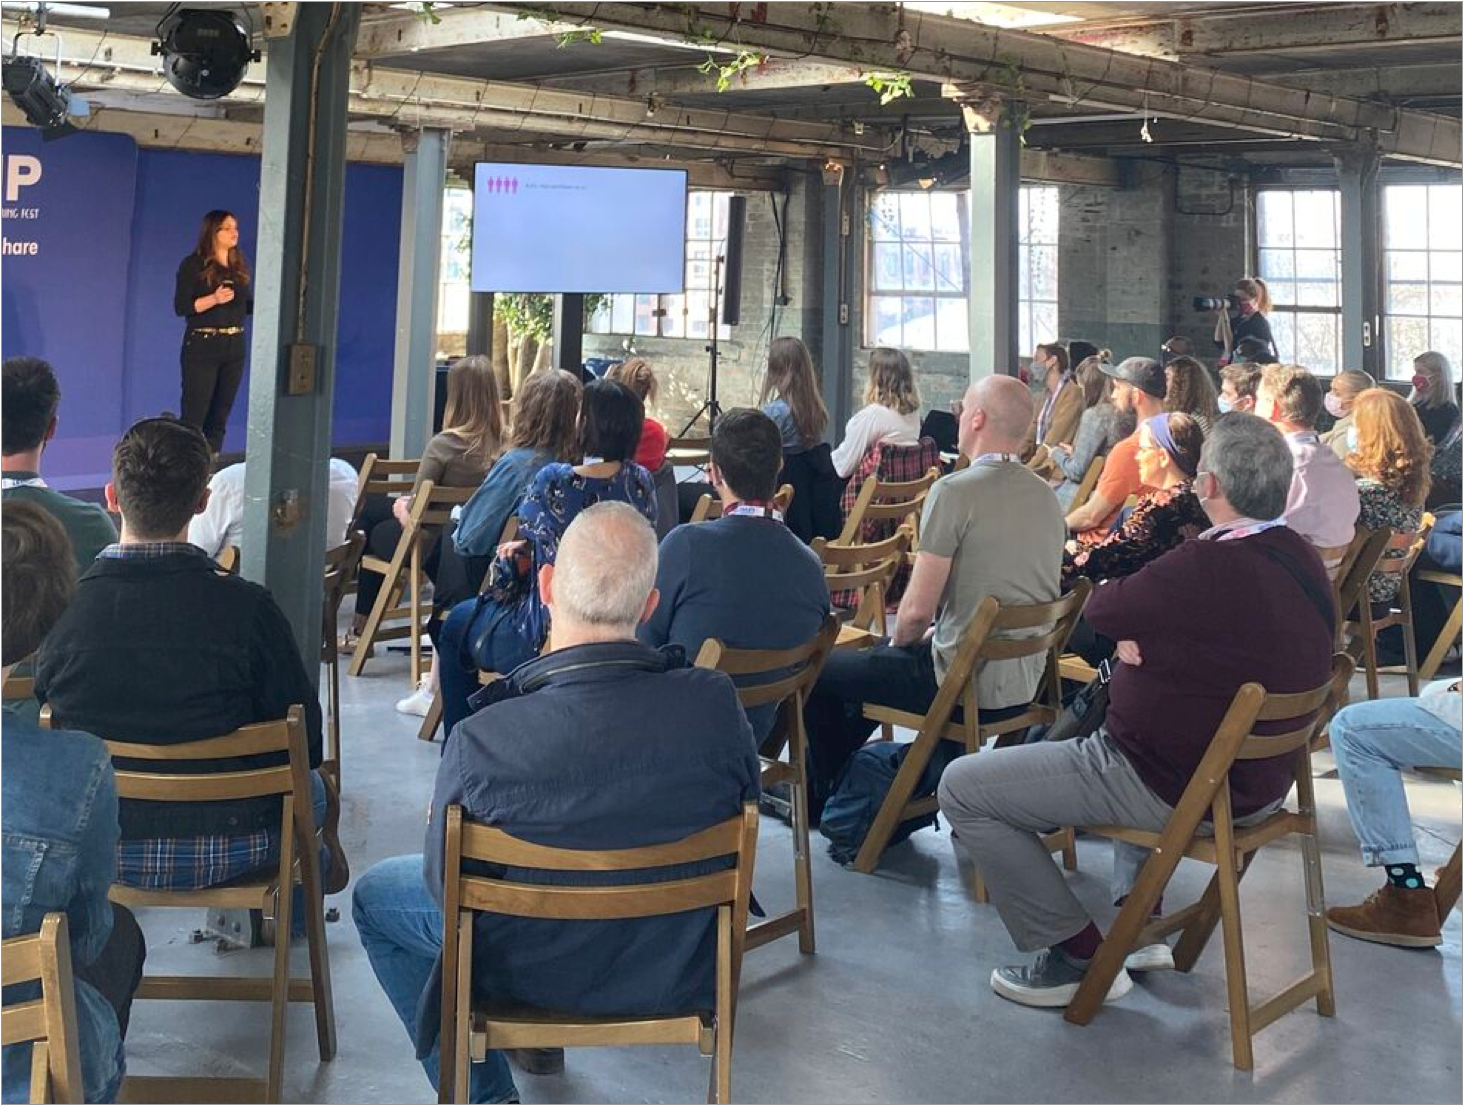 A photo of a talk being given; a crowd of approximately 40 attendees on wooden folding chairs facing a stage with a speaker and large monitor. Event is taking place in a refurbished industrial space, with exposed brick walls and steel support pillars.